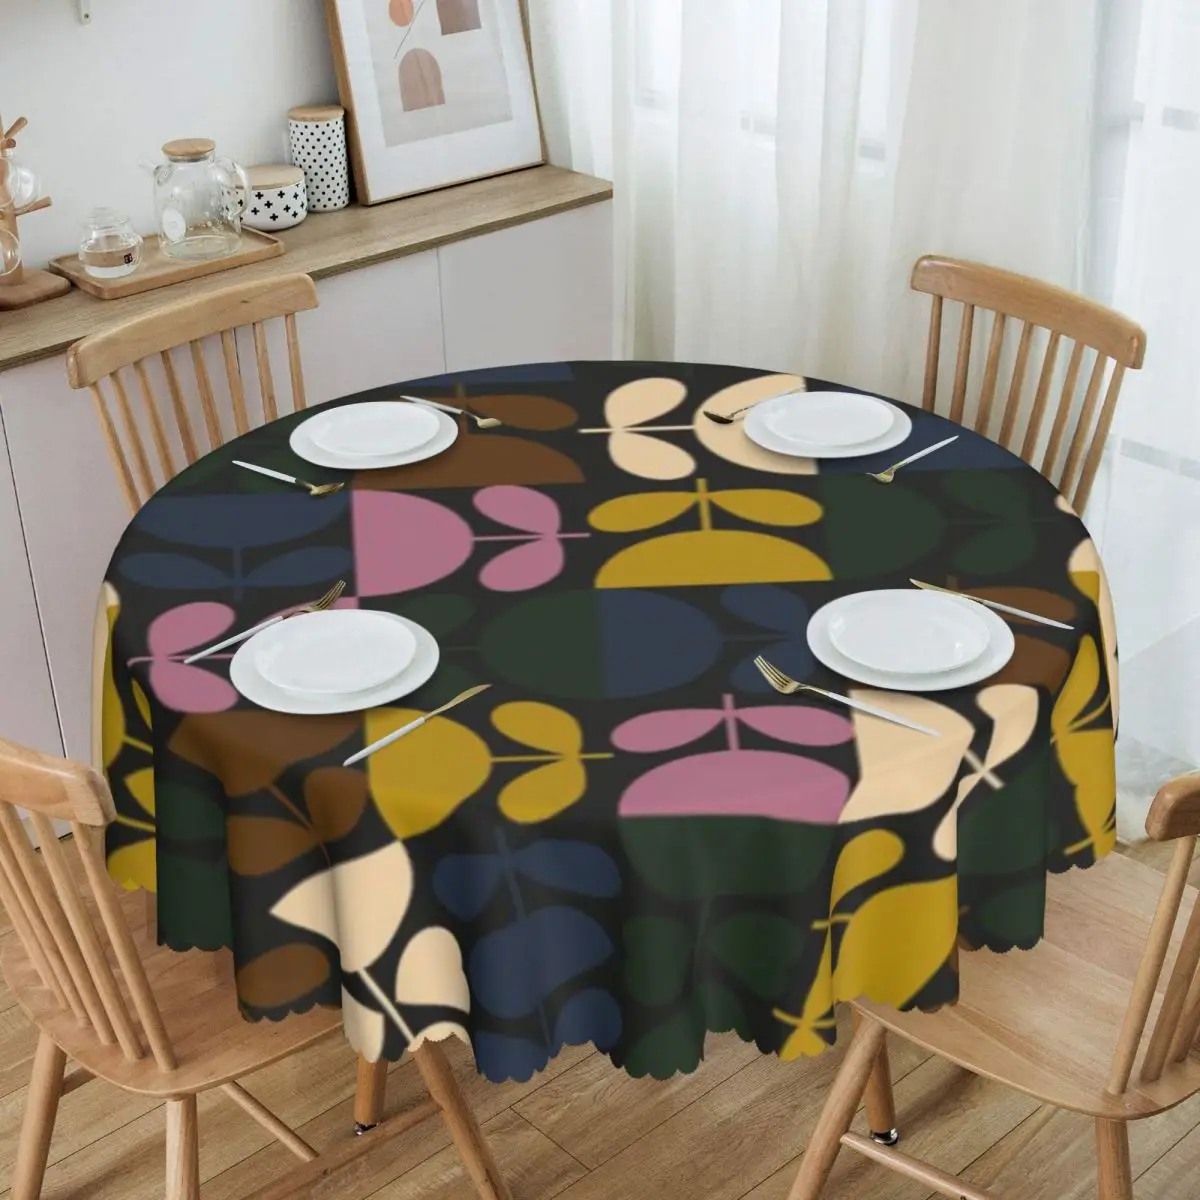 

Round Orla Kiely Multi Stem Geometric Tablecloth Waterproof Oil-Proof Table Covers 60 inch Scandi Mid Century Modern Table Cloth